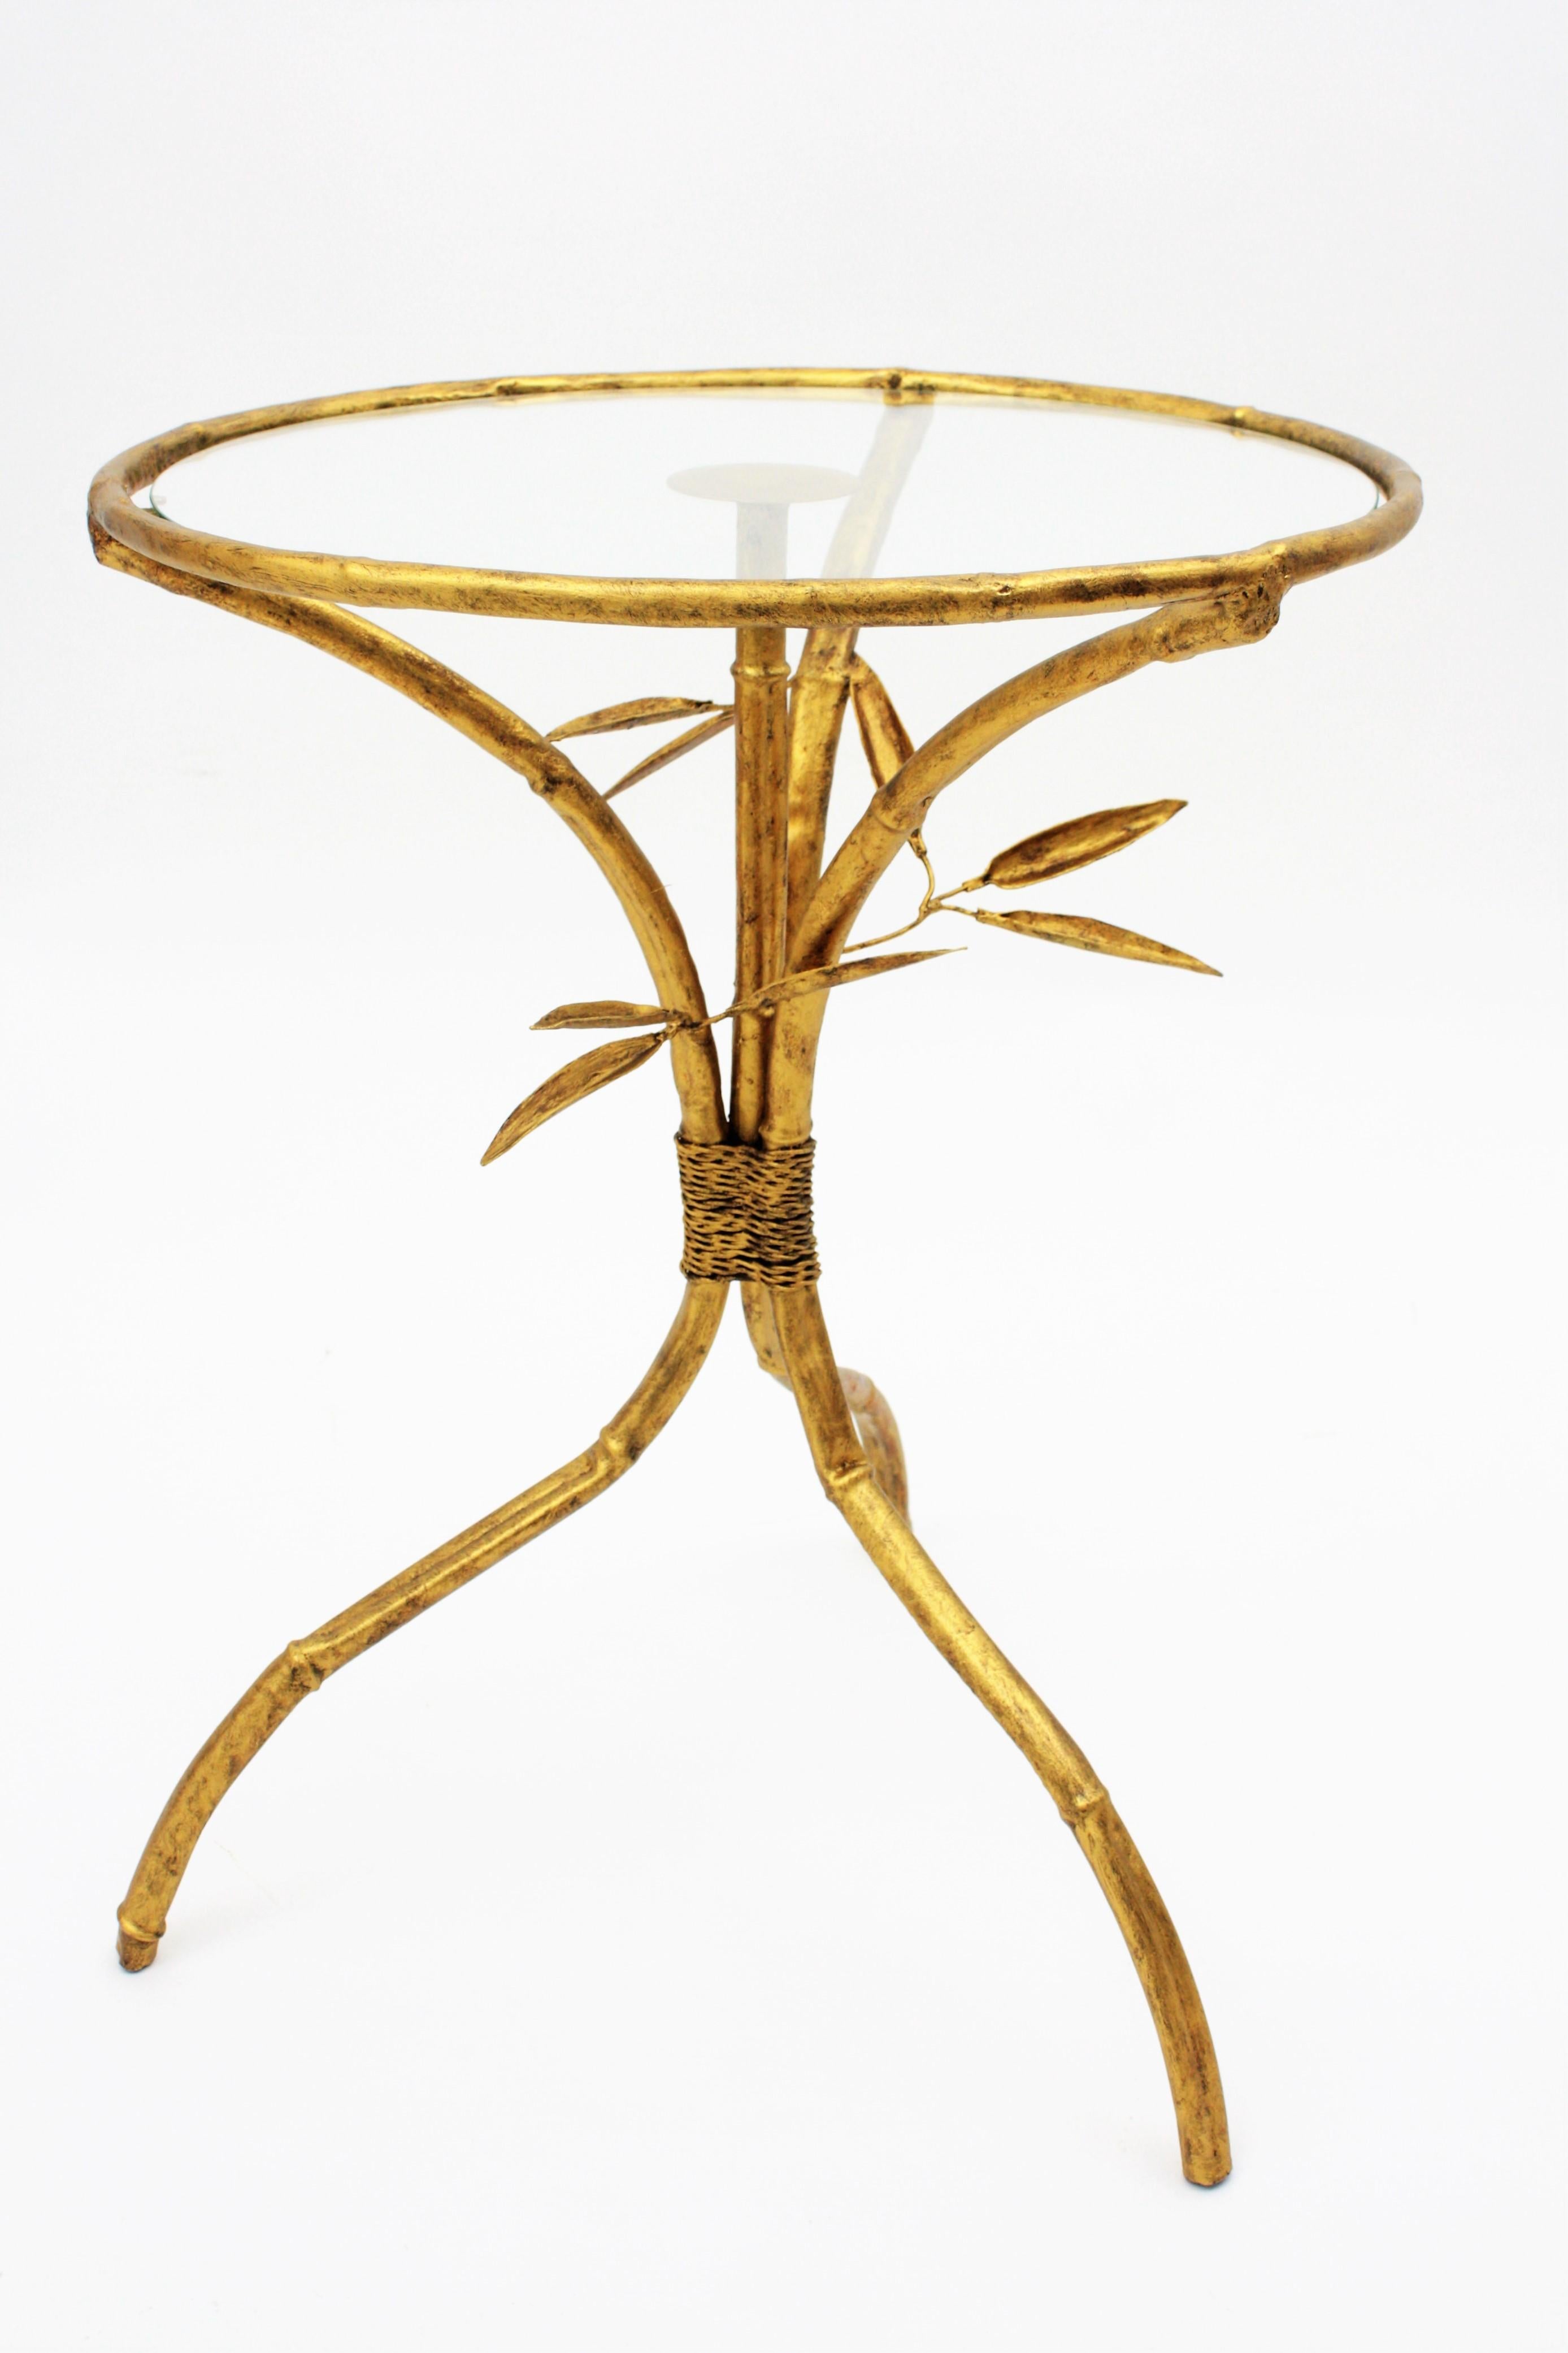 Elegant Hollywood Regency gilt iron faux bamboo gueridon drinks table with round glass top and tripod base. Spain, 1950s. 
This table is made in hand-hammered iron gold leaf finish. It has a beautiful faux bamboo design with leaf and rope details